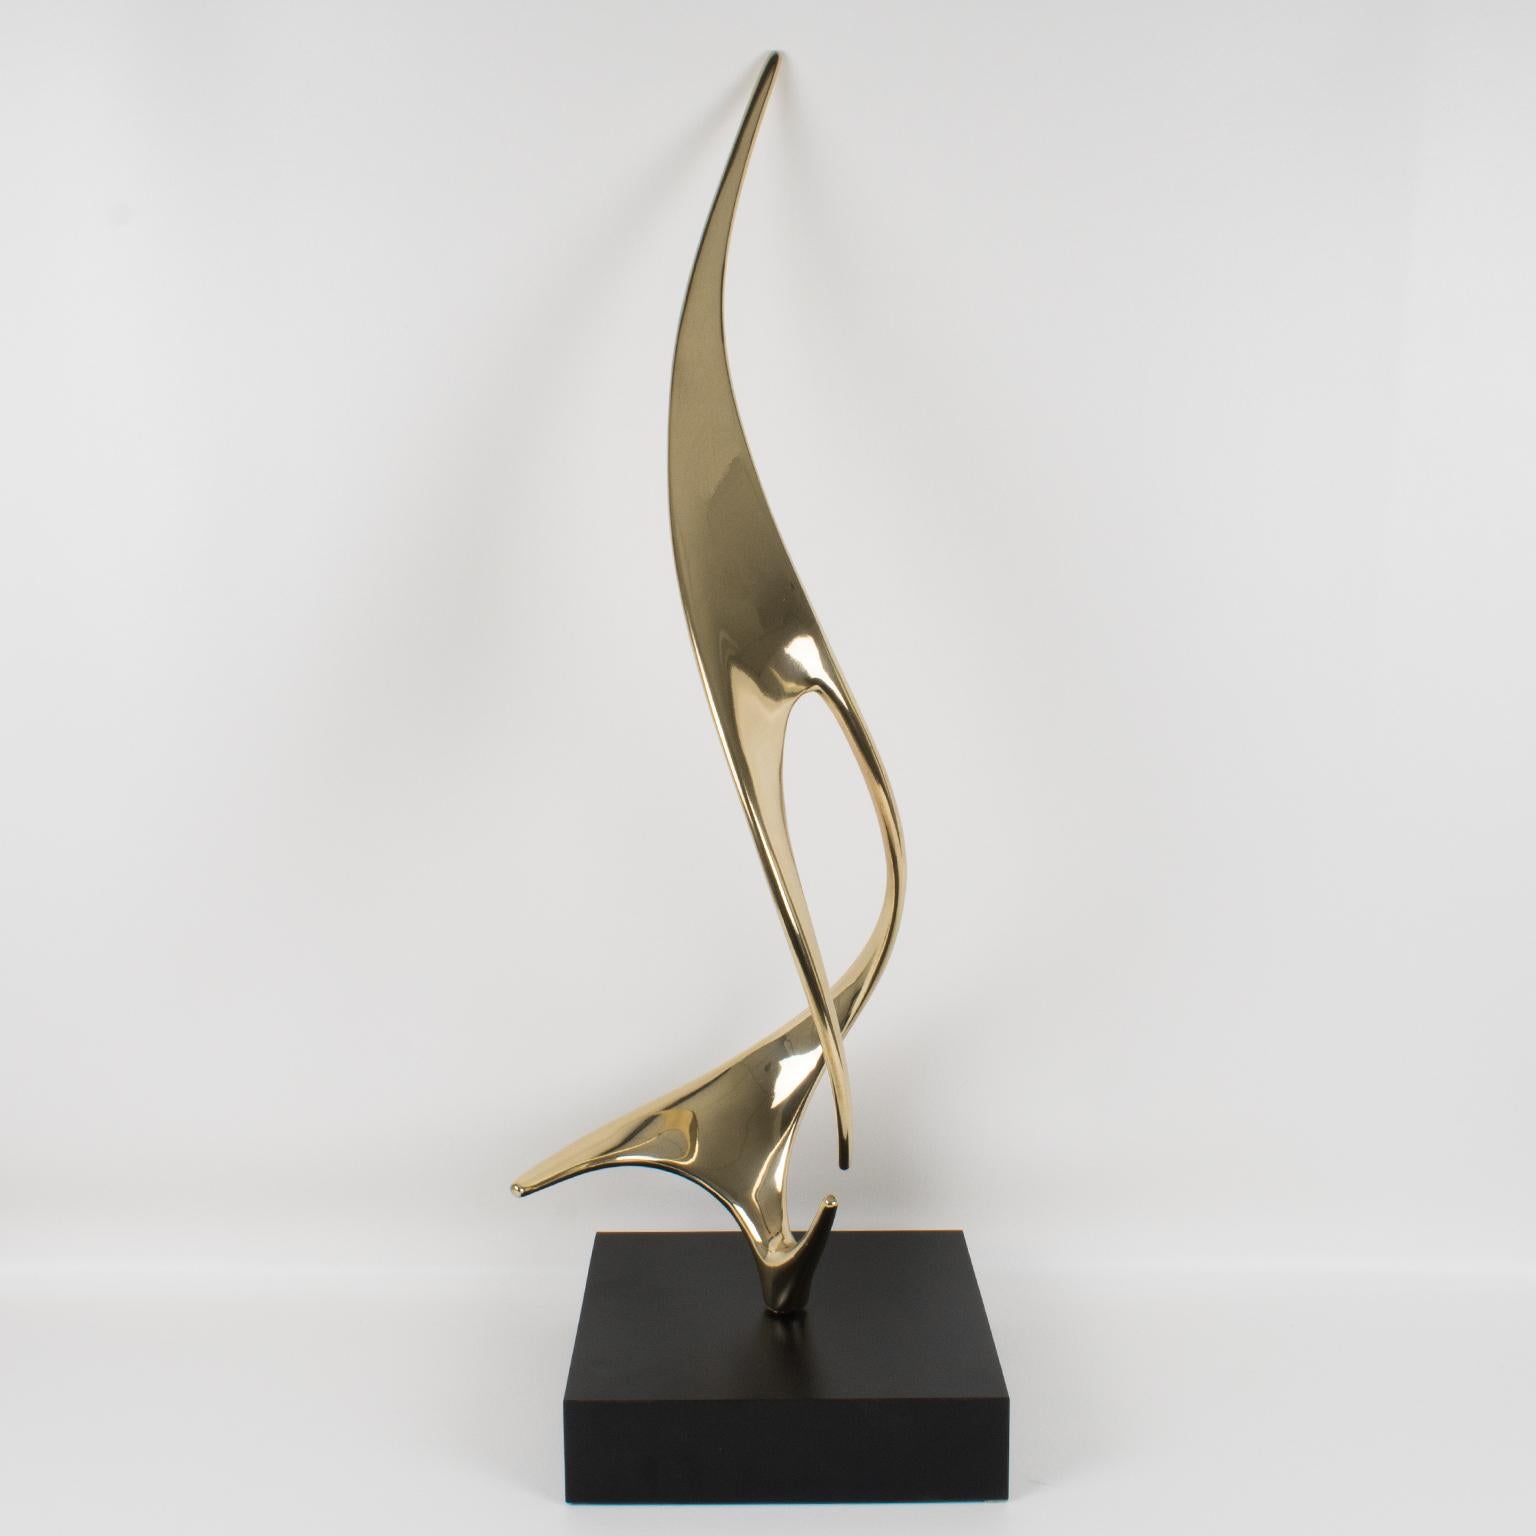 Spectacular extra tall abstract bronze sculpture by Lou Pearson and Robbie Robins, named 